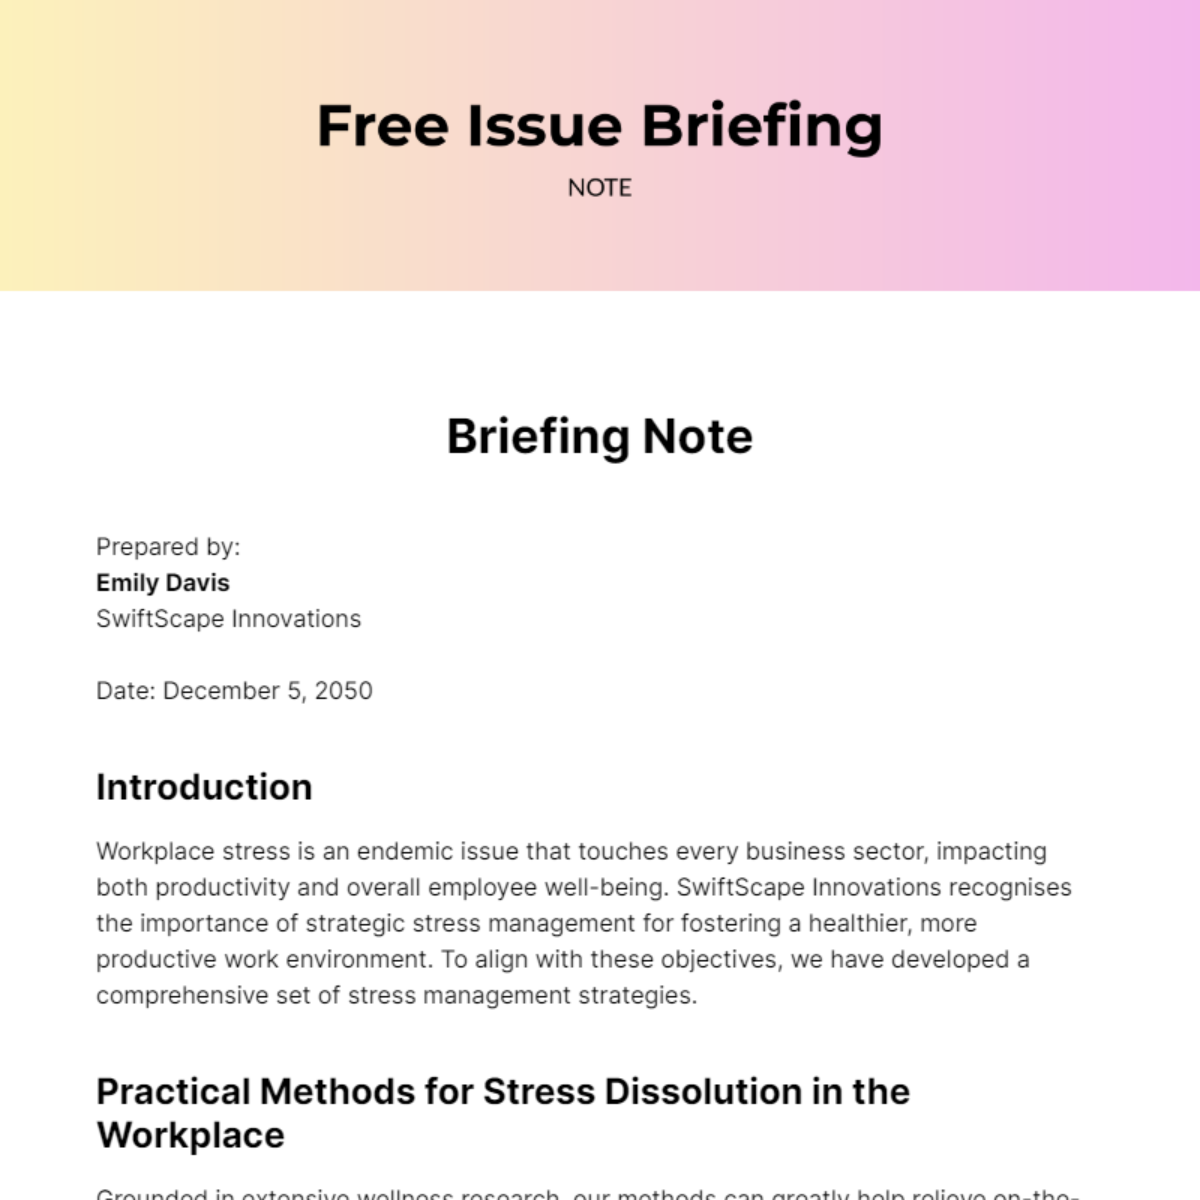 Free Issue Briefing Note Template